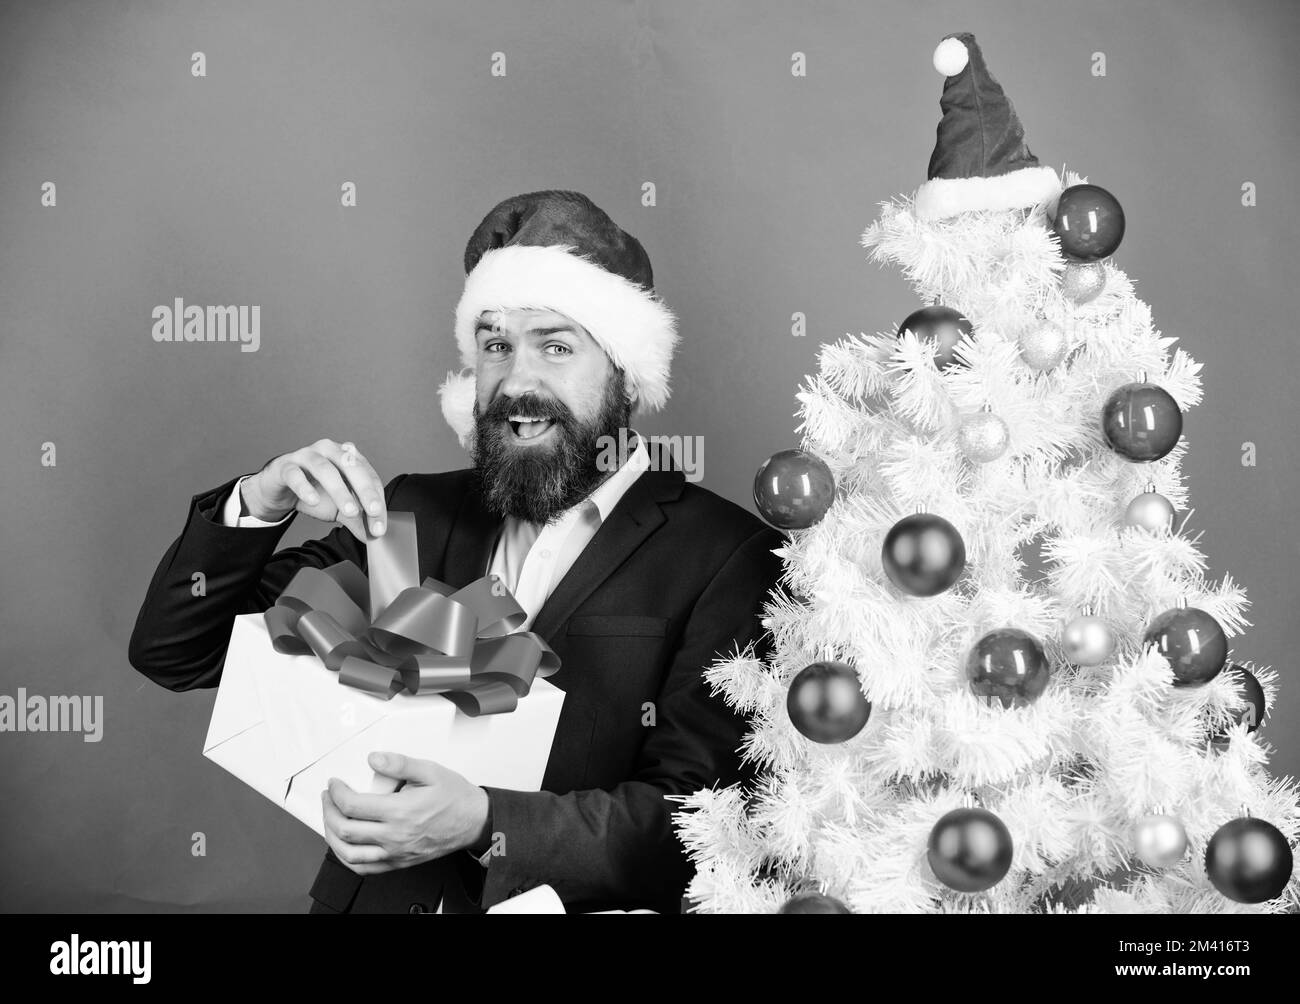 Winter holidays. Boxing day. Christmas party. Sharing kindness and happiness. Prepare gifts for everyone. Man bearded hipster formal suit christmas Stock Photo